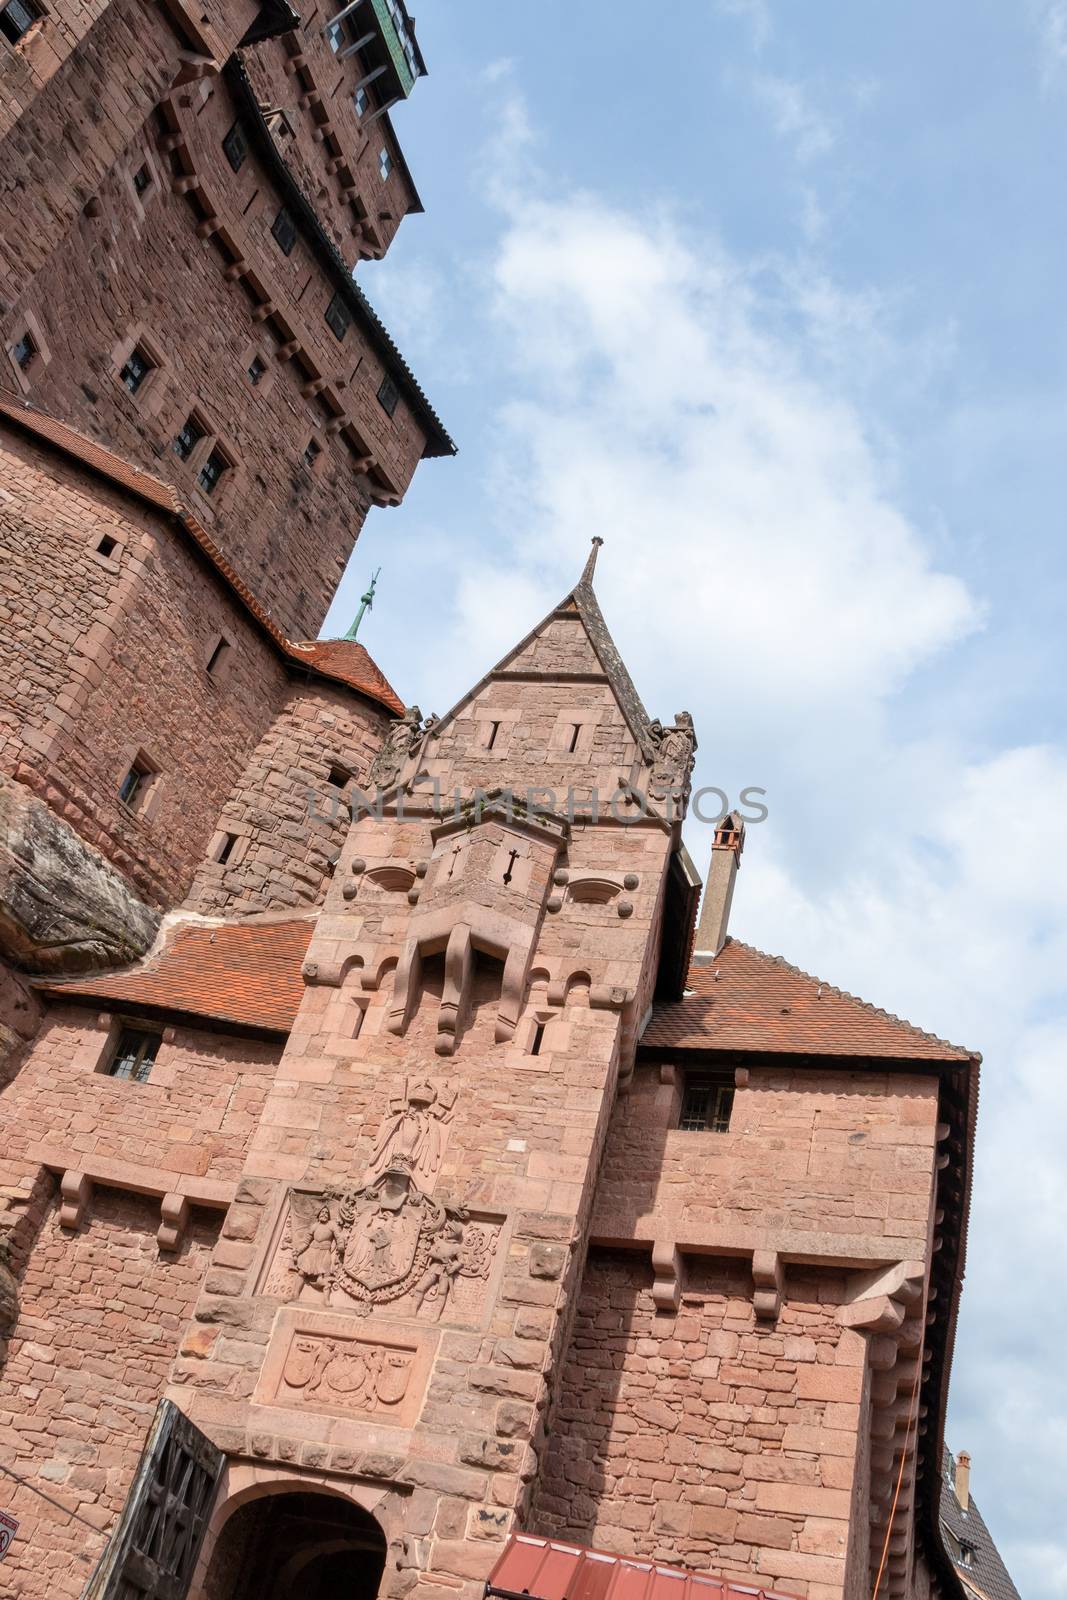 An image of the Haut-Koenigsbourg in France